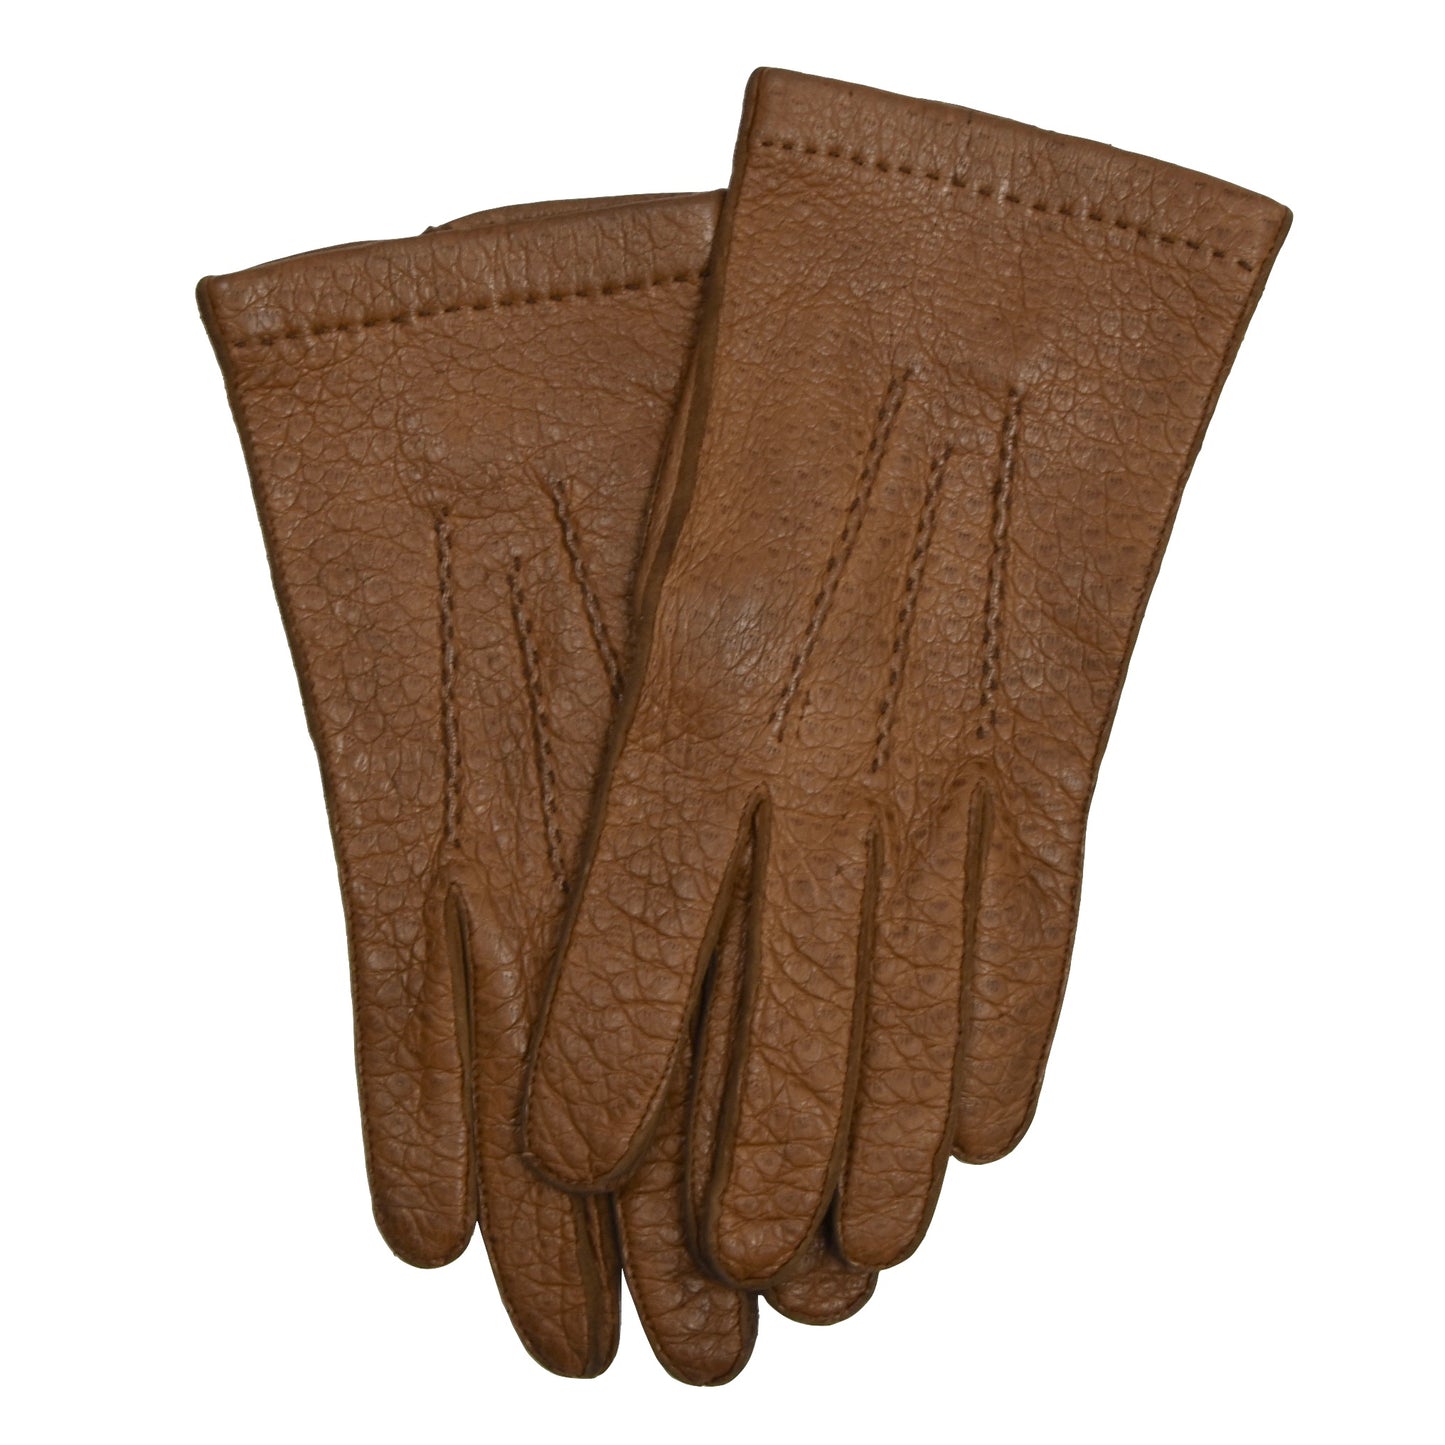 Unlined Peccary Leather Gloves Size 9 - Tan